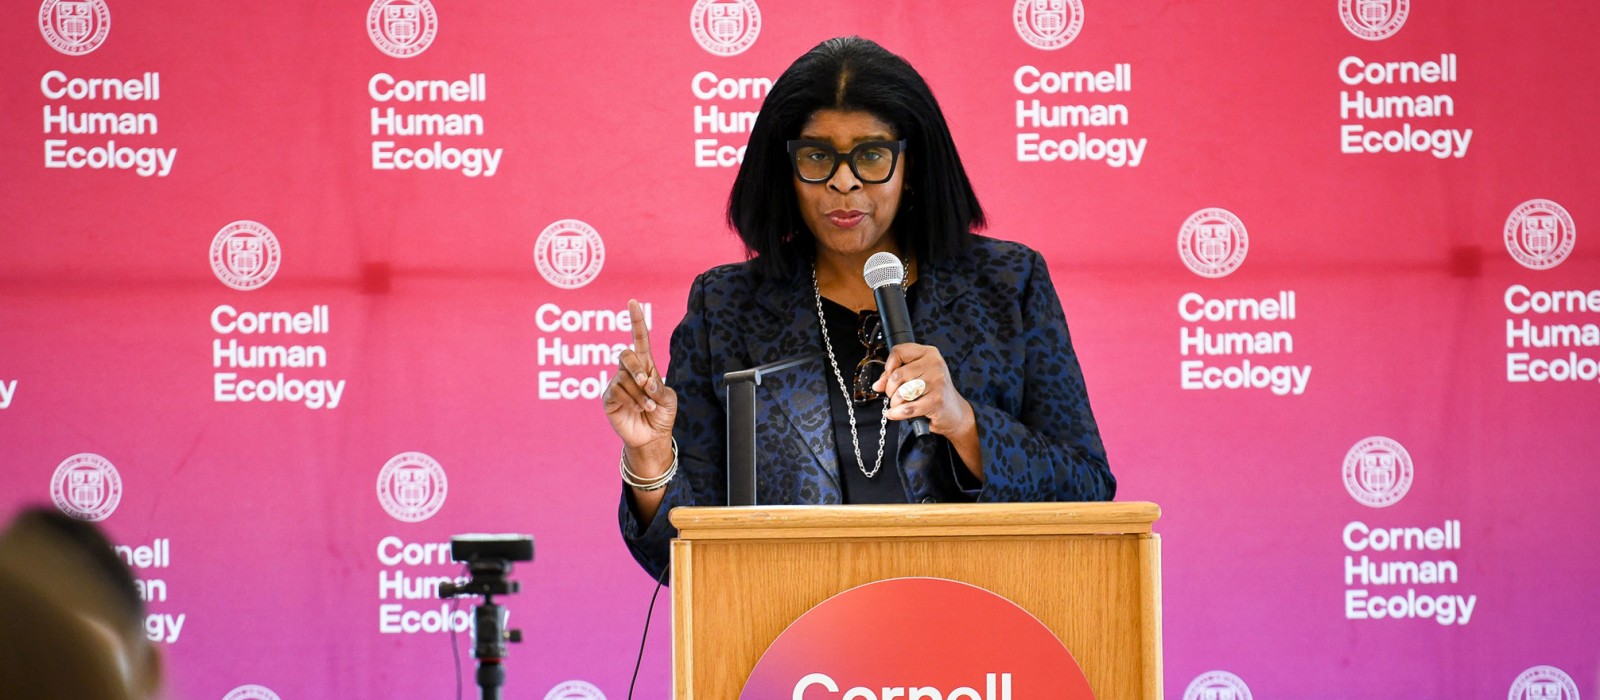 Ruth C. Browne speaks at Cornell Human Ecology